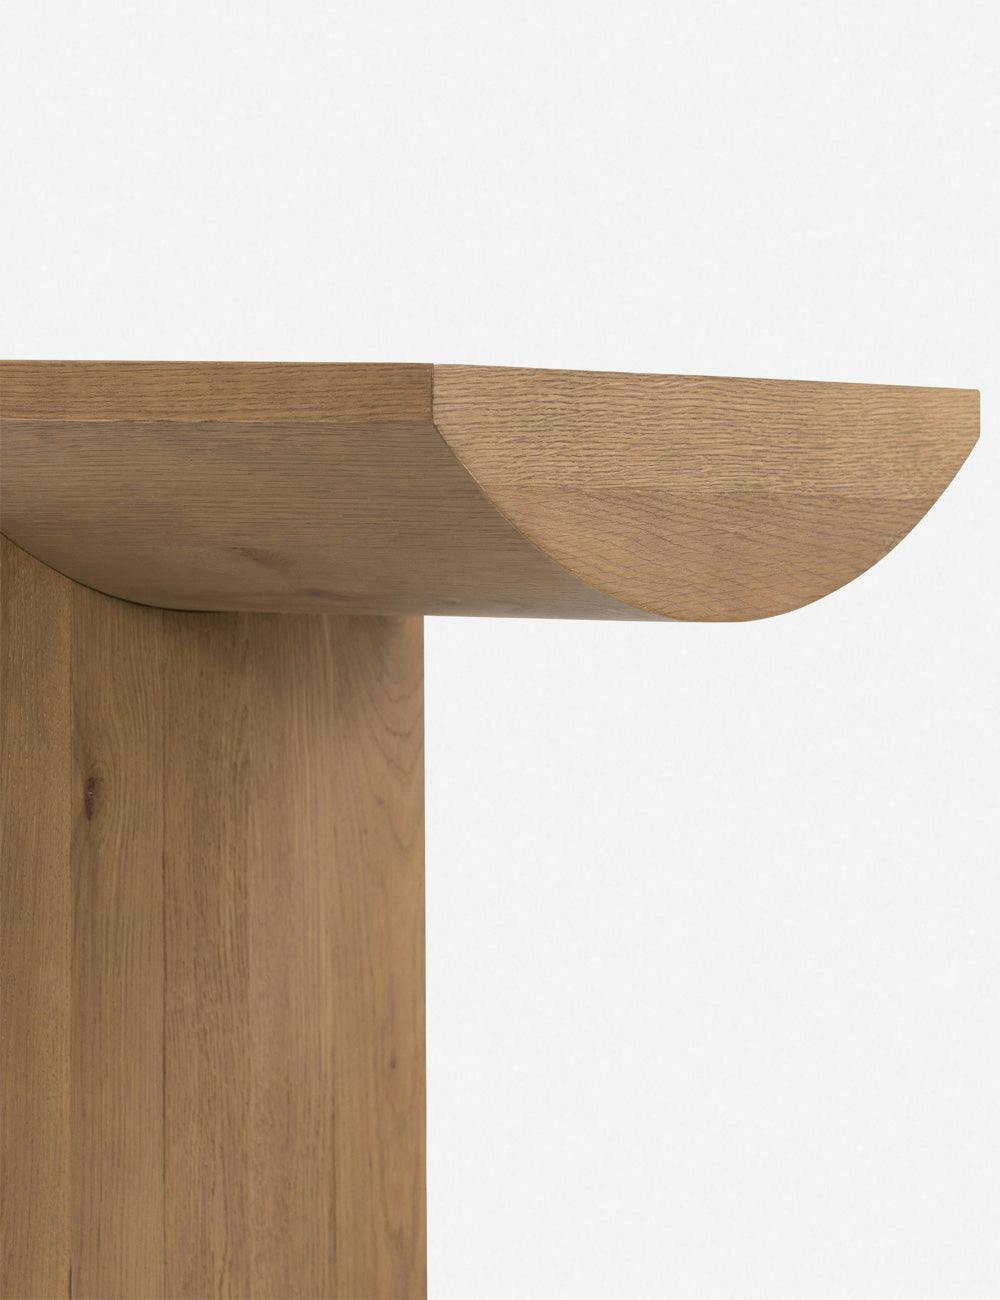 Remwald Console Table - Natural